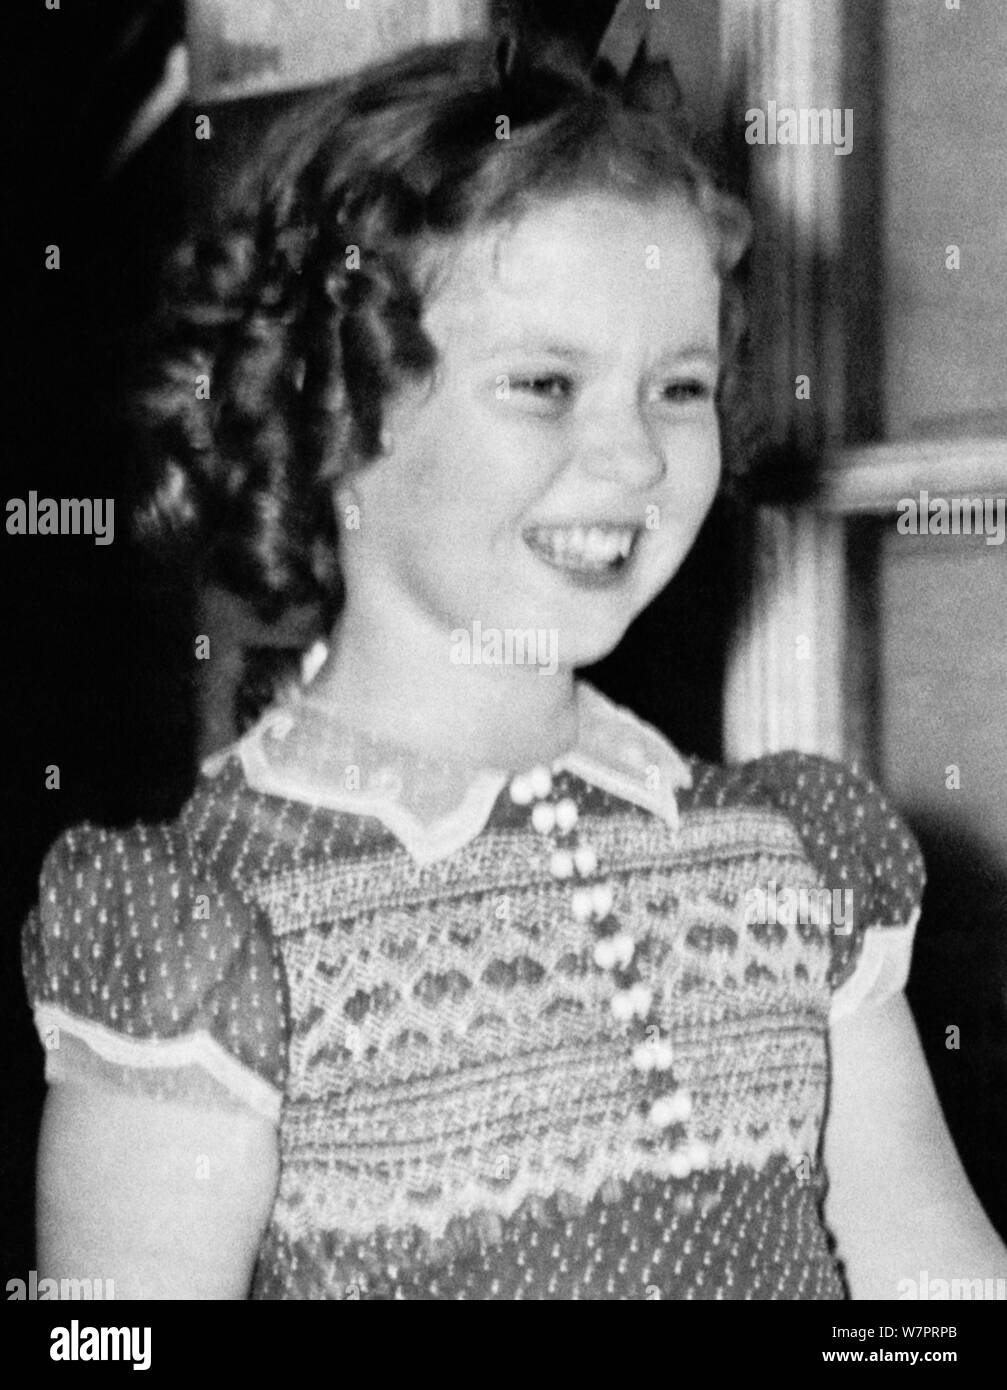 Vintage photo of American child film star Shirley Temple (1928 – 2014). The image was captured on June 24 1938 as the young actress left the White House following a meeting with US President Franklin D Roosevelt. During their conversation she told the President how she had lost a tooth the night before when it fell out as she ate a sandwich. Stock Photo